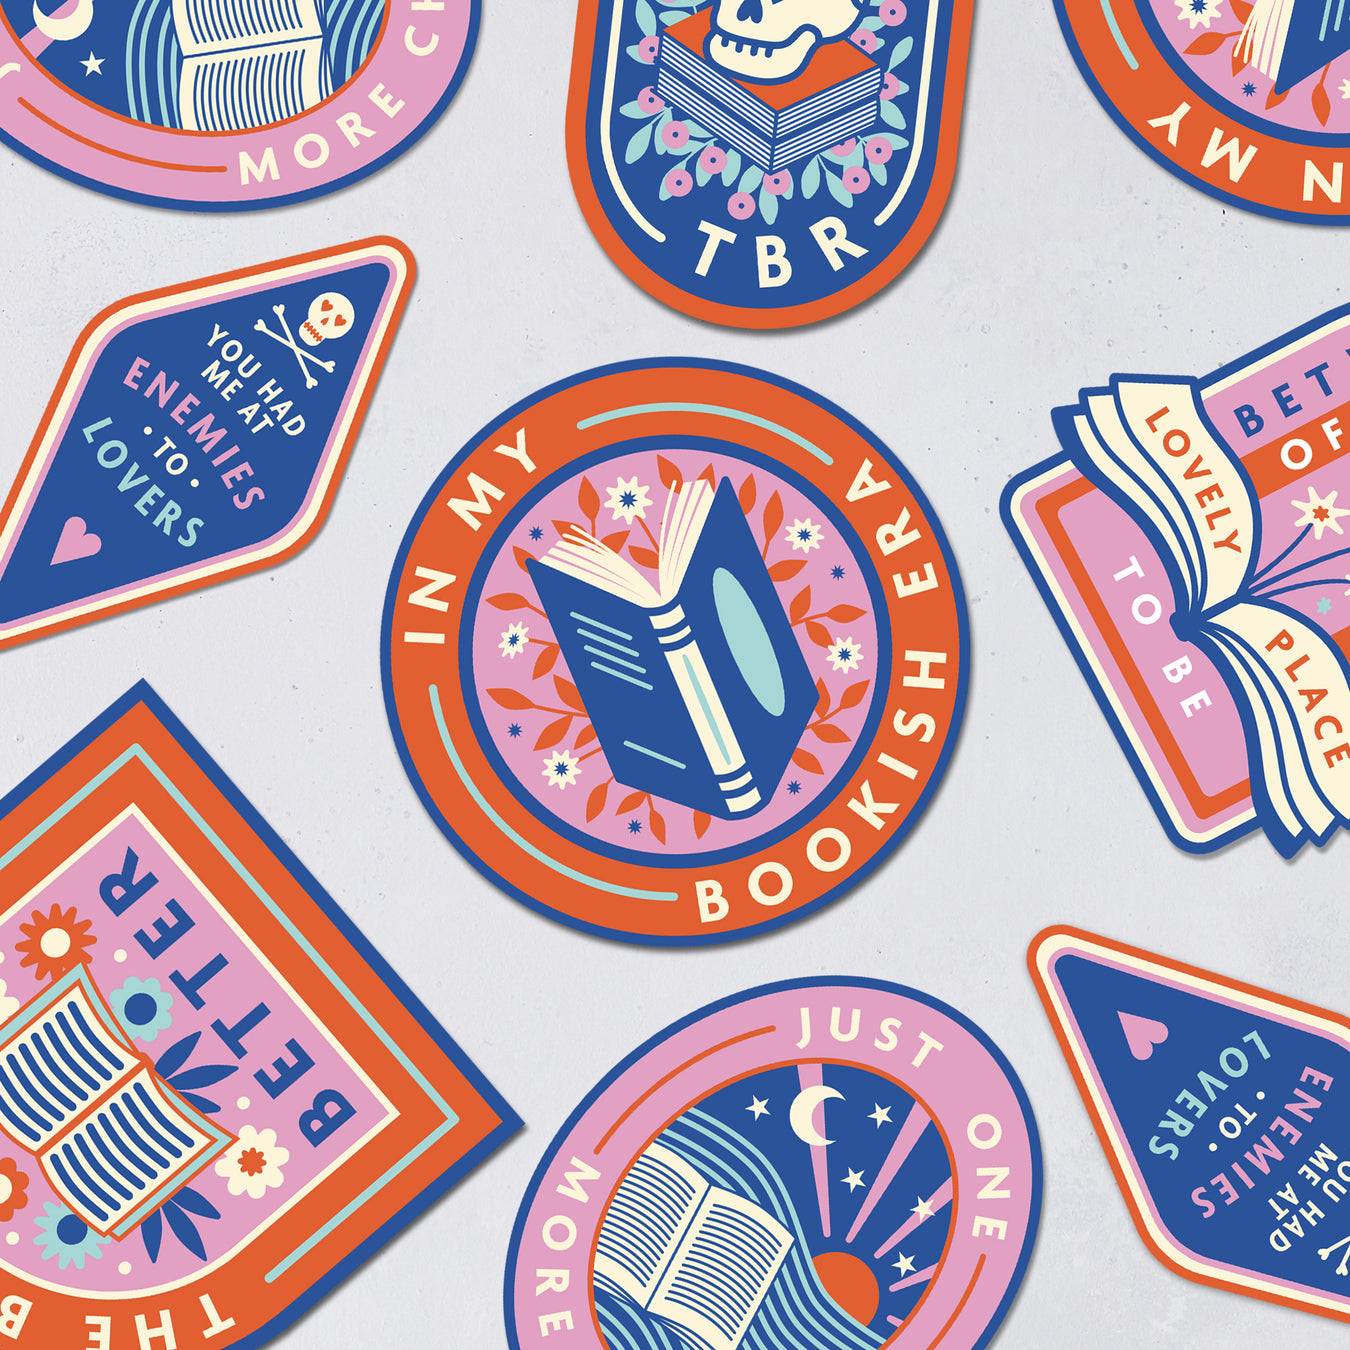 The Bookish Era Edit by Bookishly. A collection inspired by the rise of booktok featuring tote bags, stickers, magnetic bookmarks, clothing. Bookish accessories.